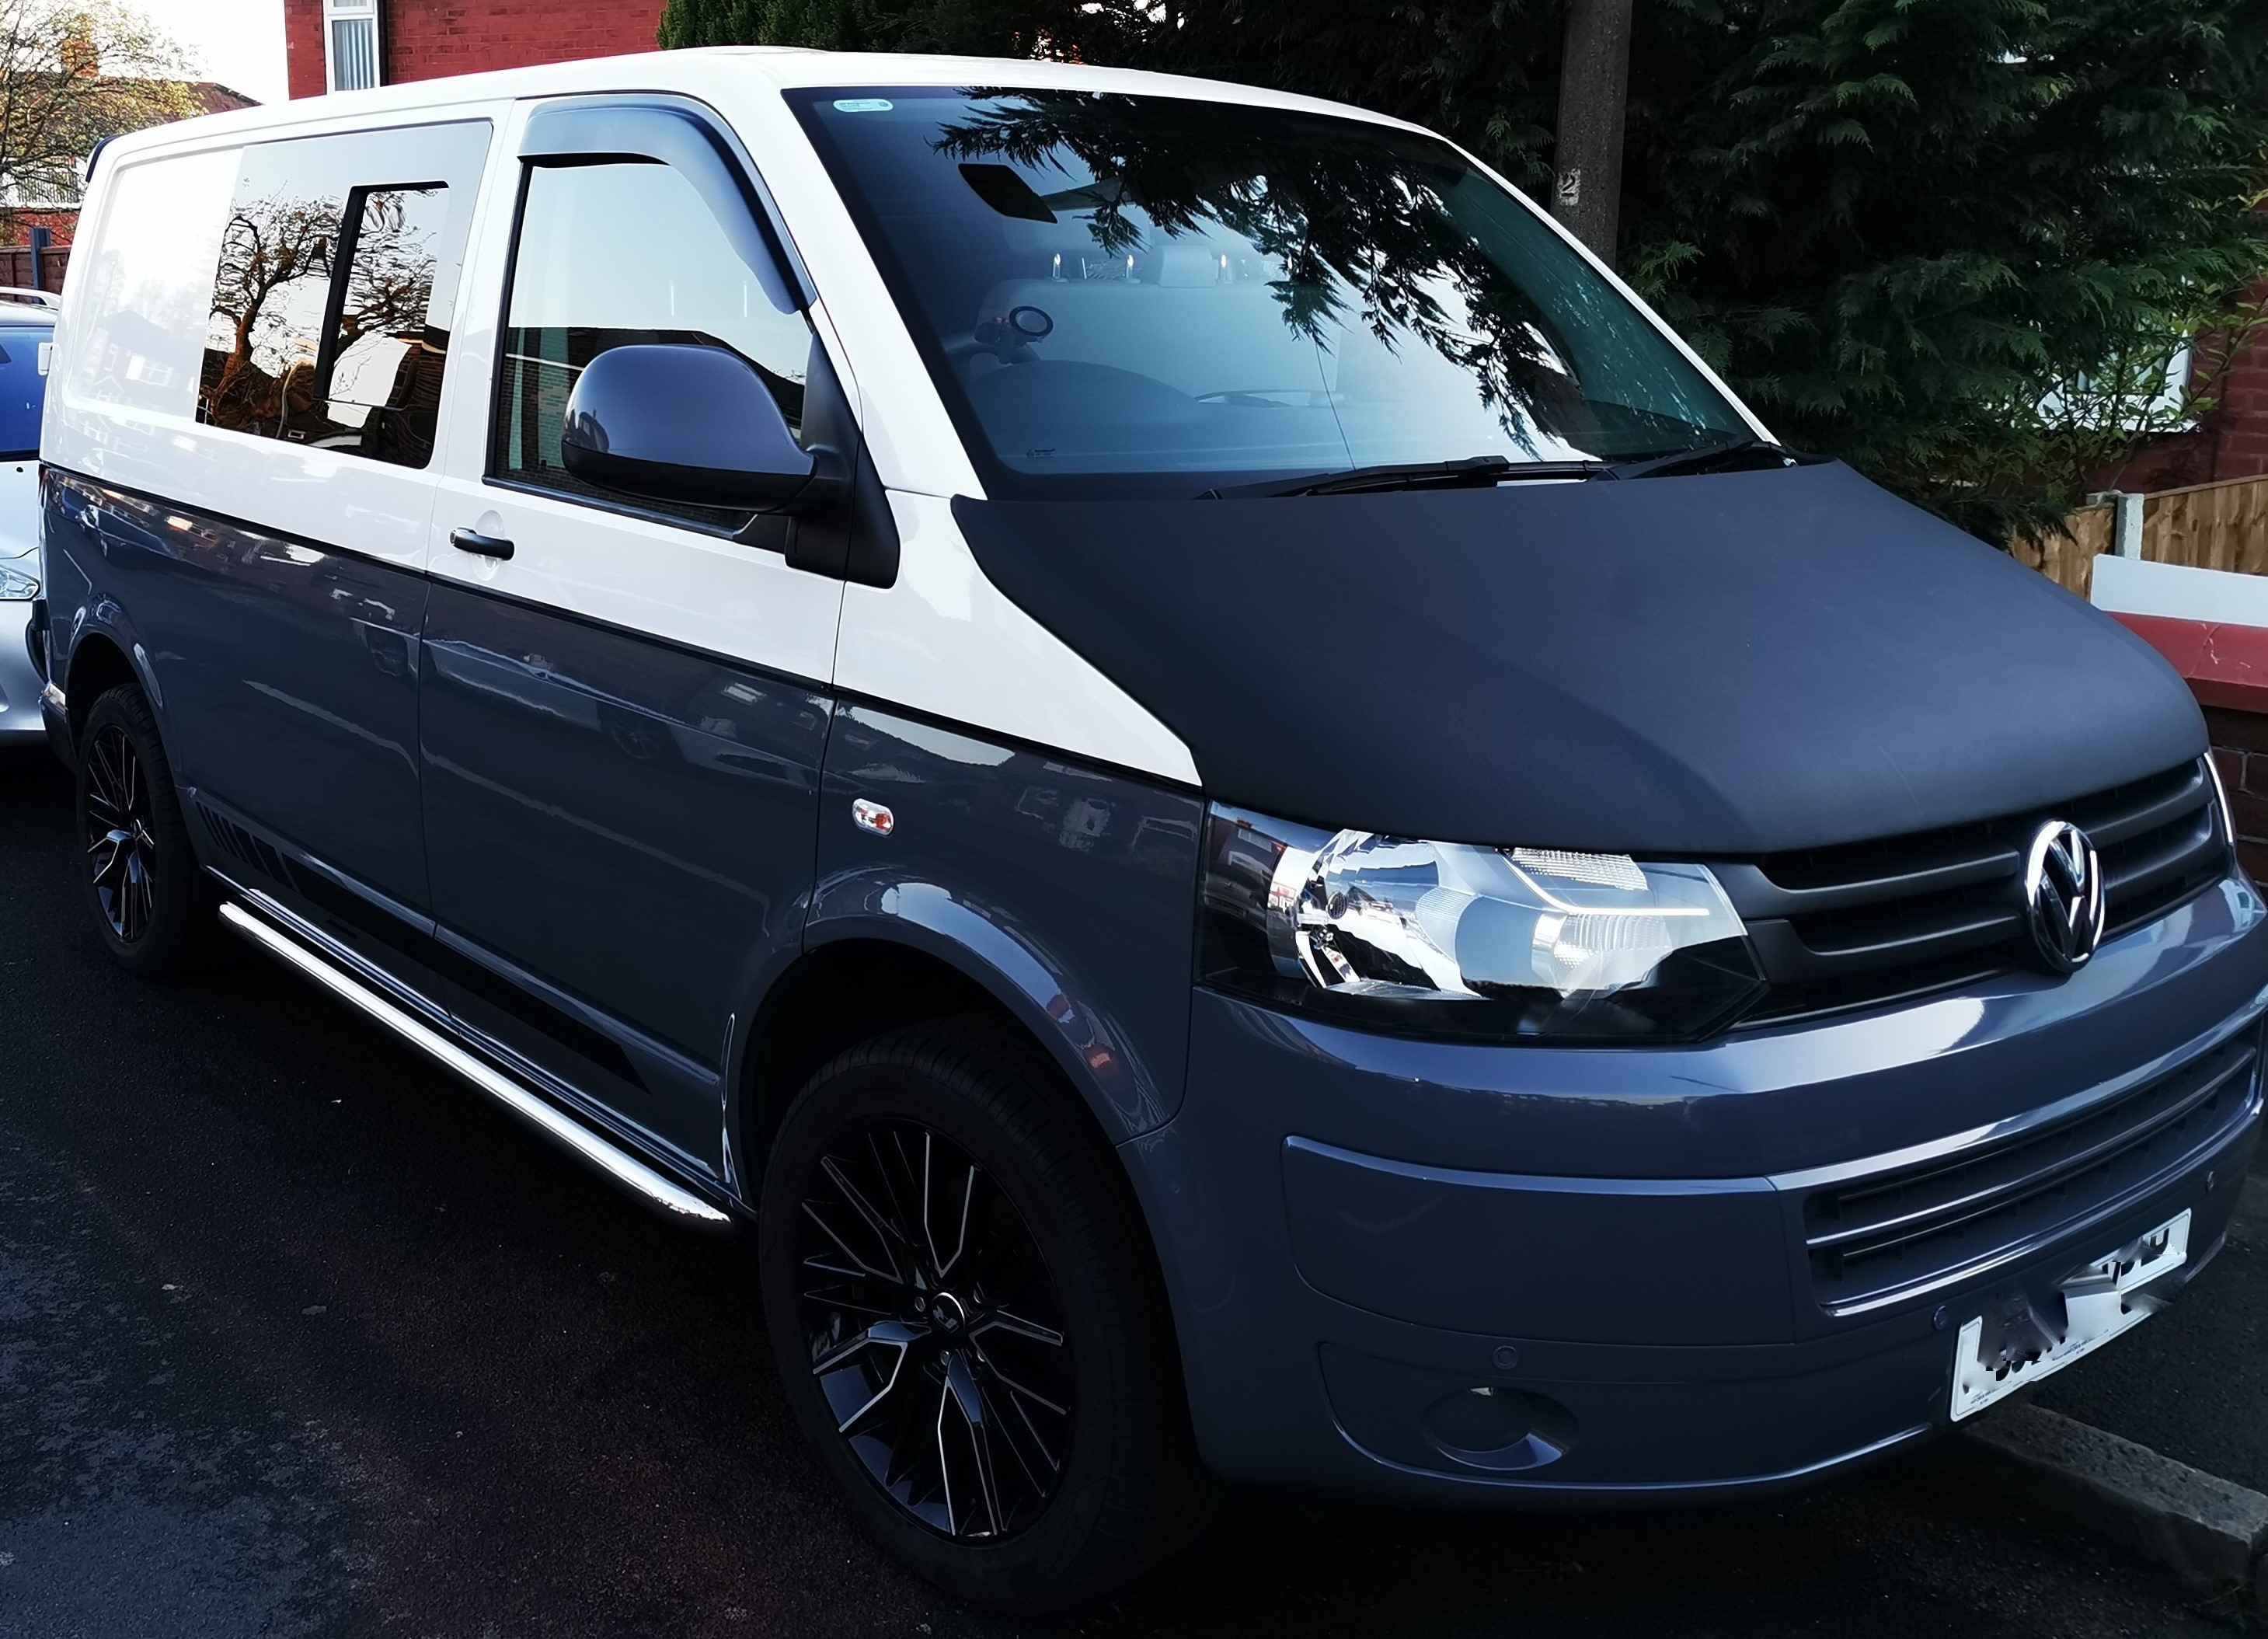 A VW T5 Campervan called Vinny and for hire in Lancashire, England